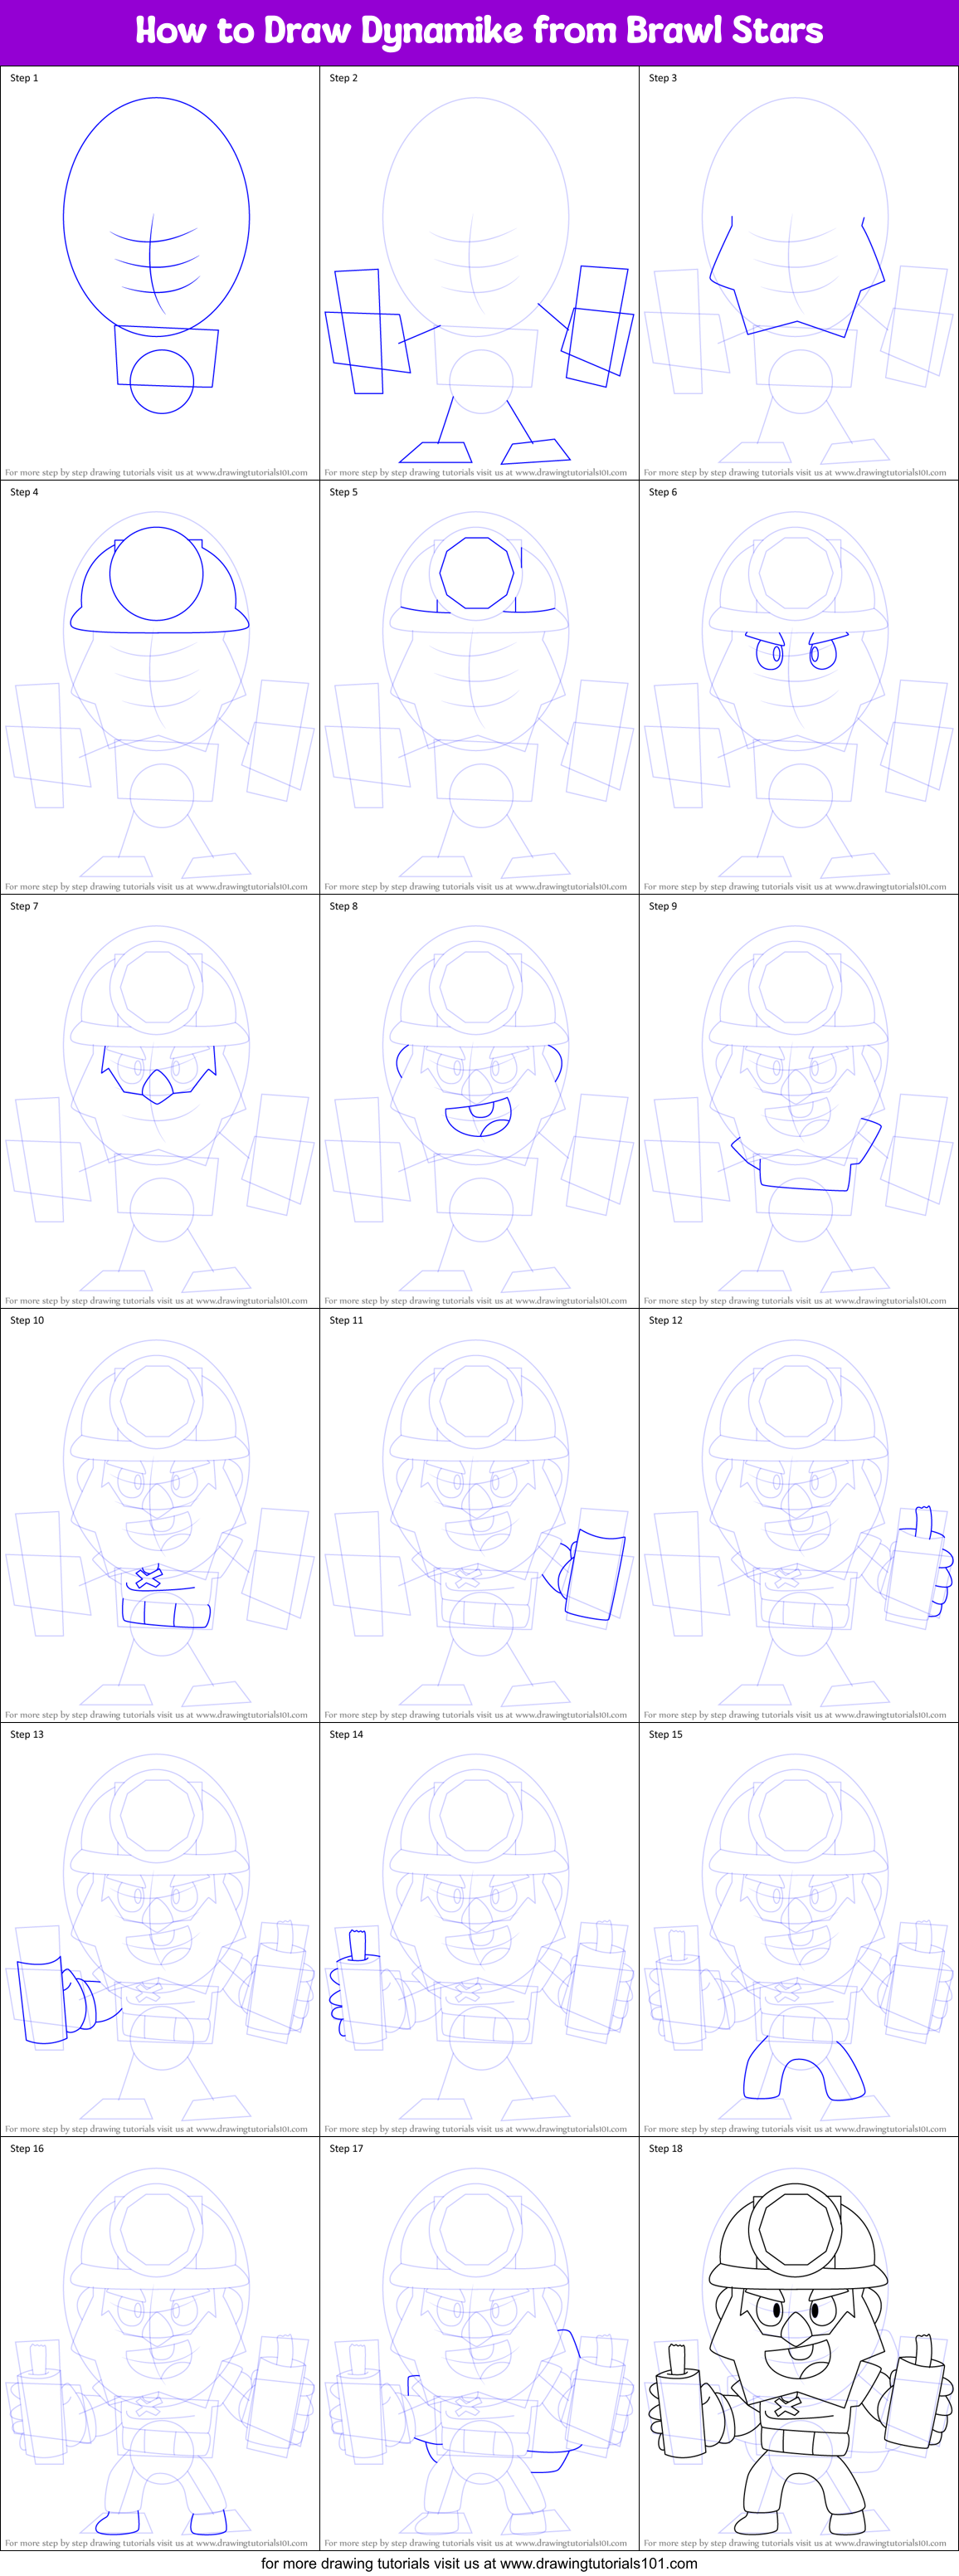 How To Draw Dynamike From Brawl Stars Printable Step By Step Drawing Sheet Drawingtutorials101 Com - dynamik brawl stars png